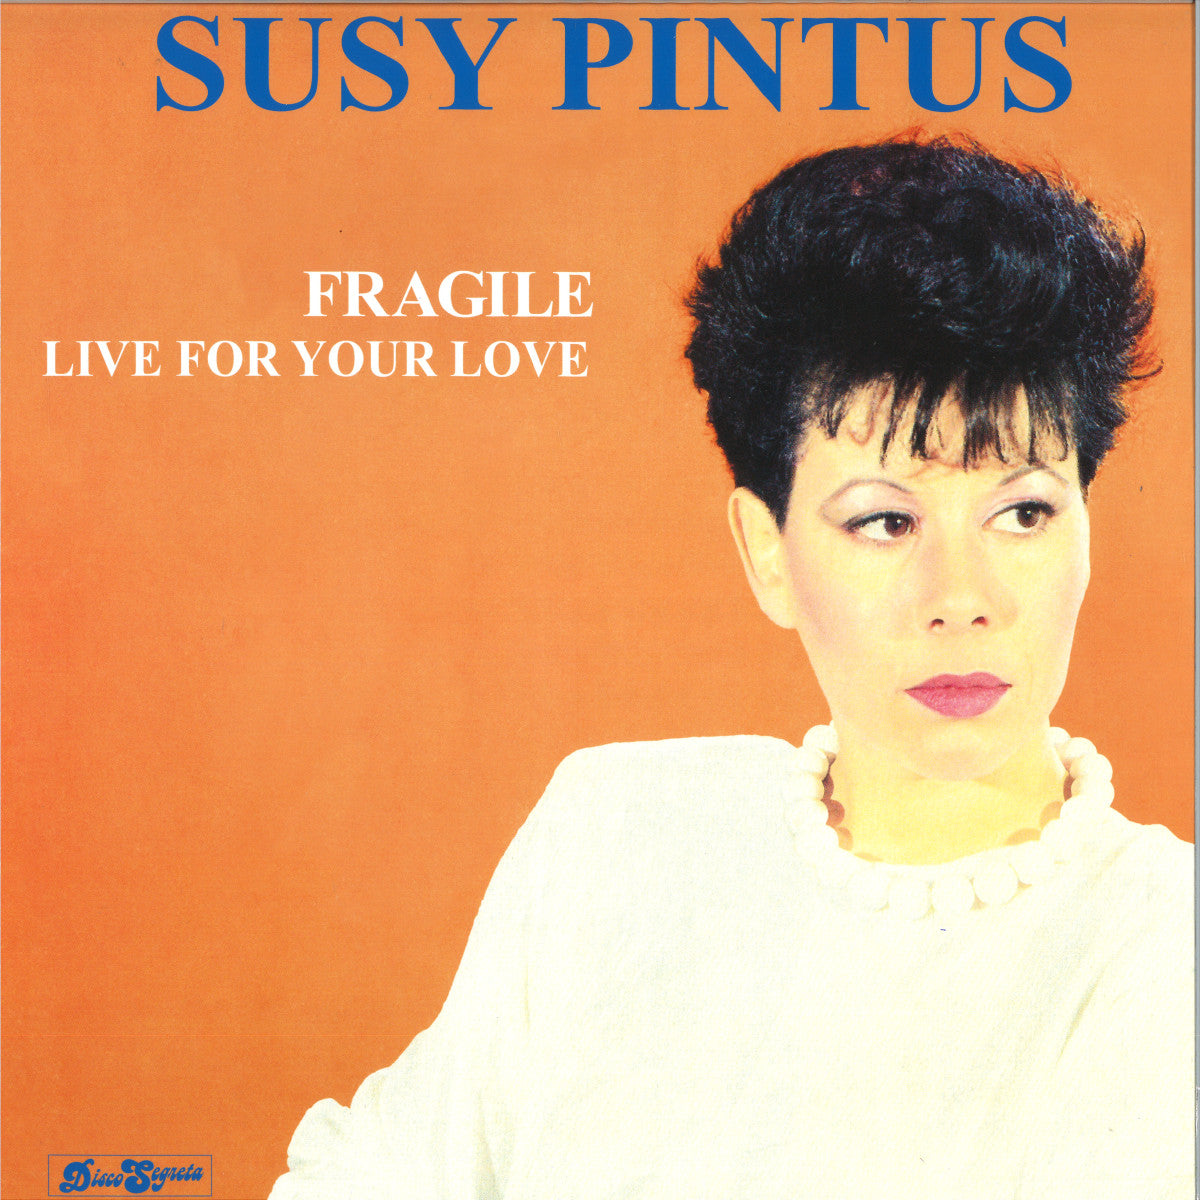 Susy Pintus - Fragile/Live for Your Love